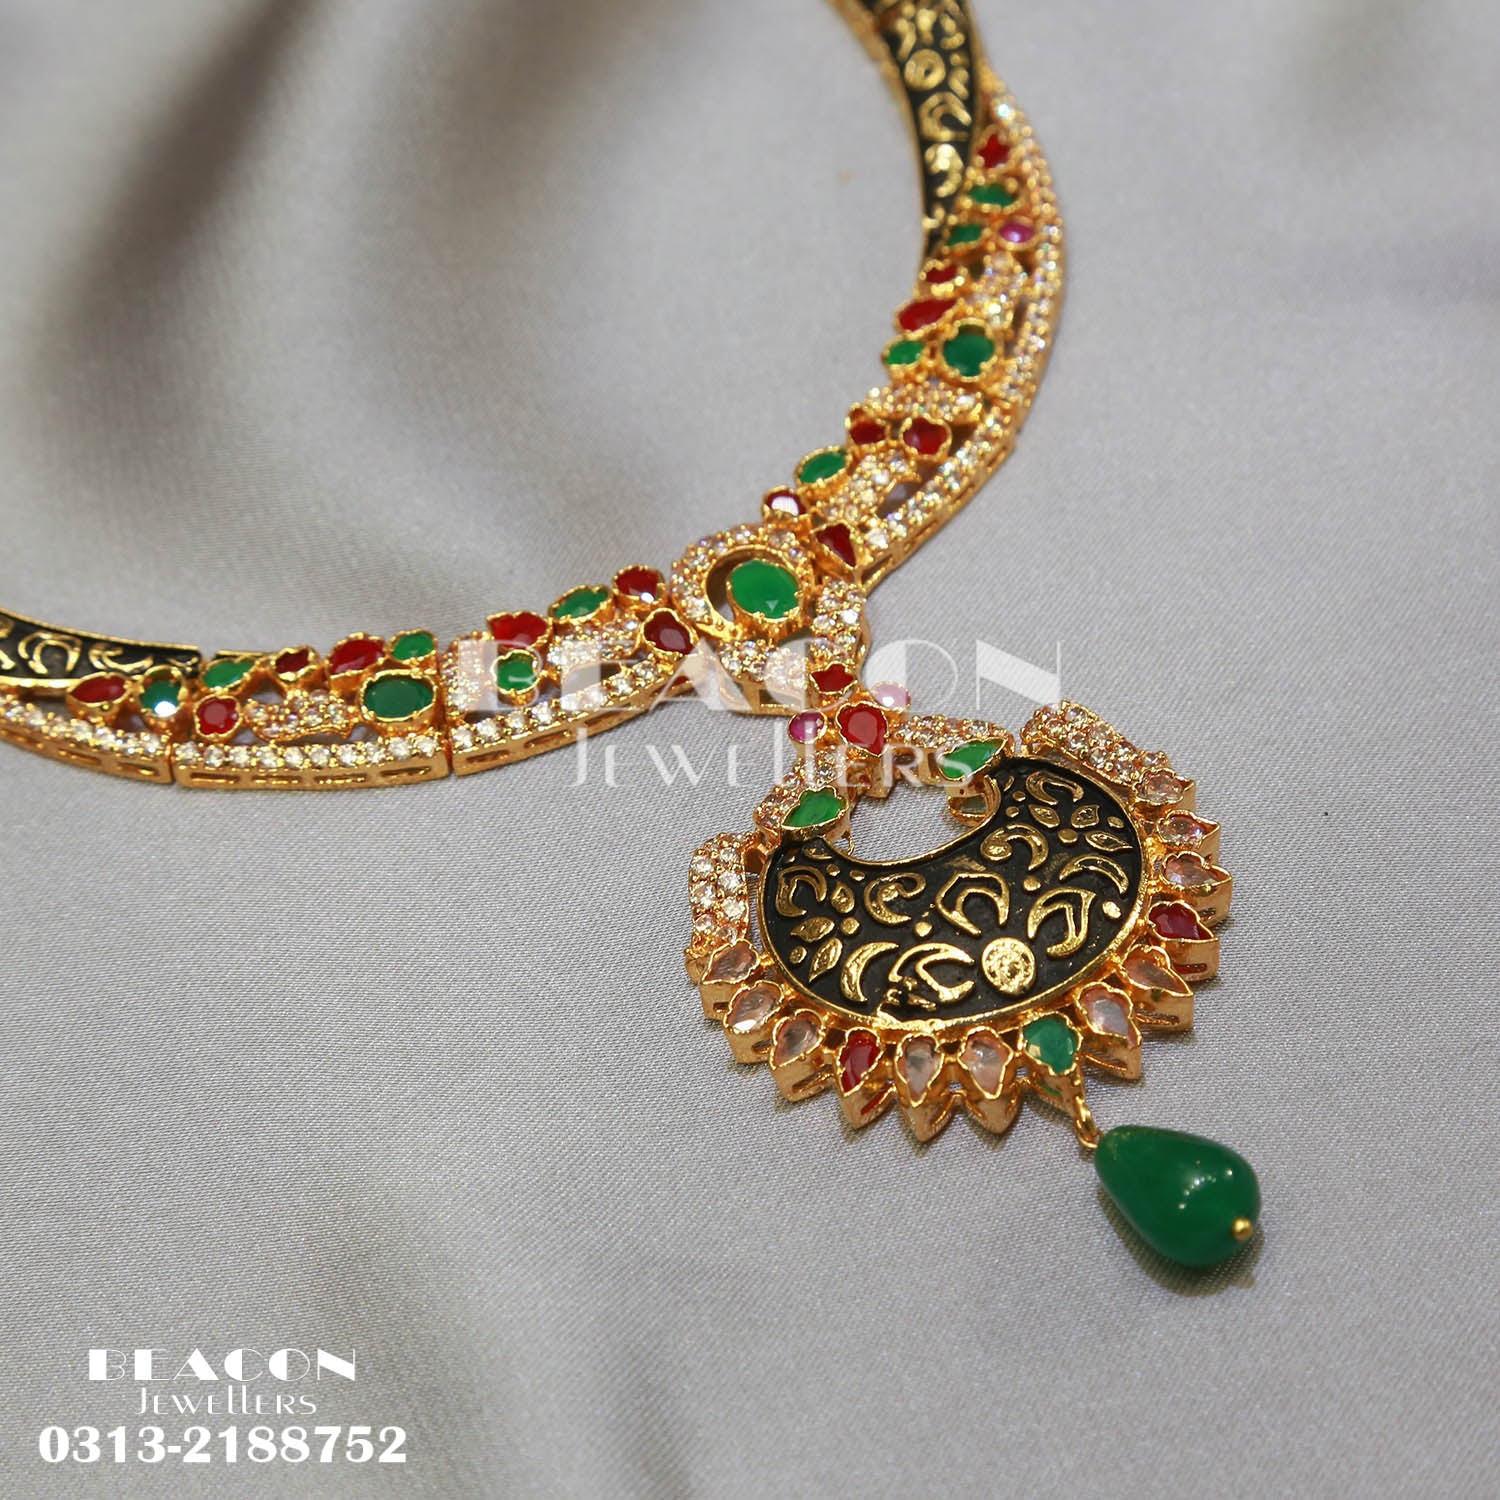 Necklace with Bindi and Earrings 64